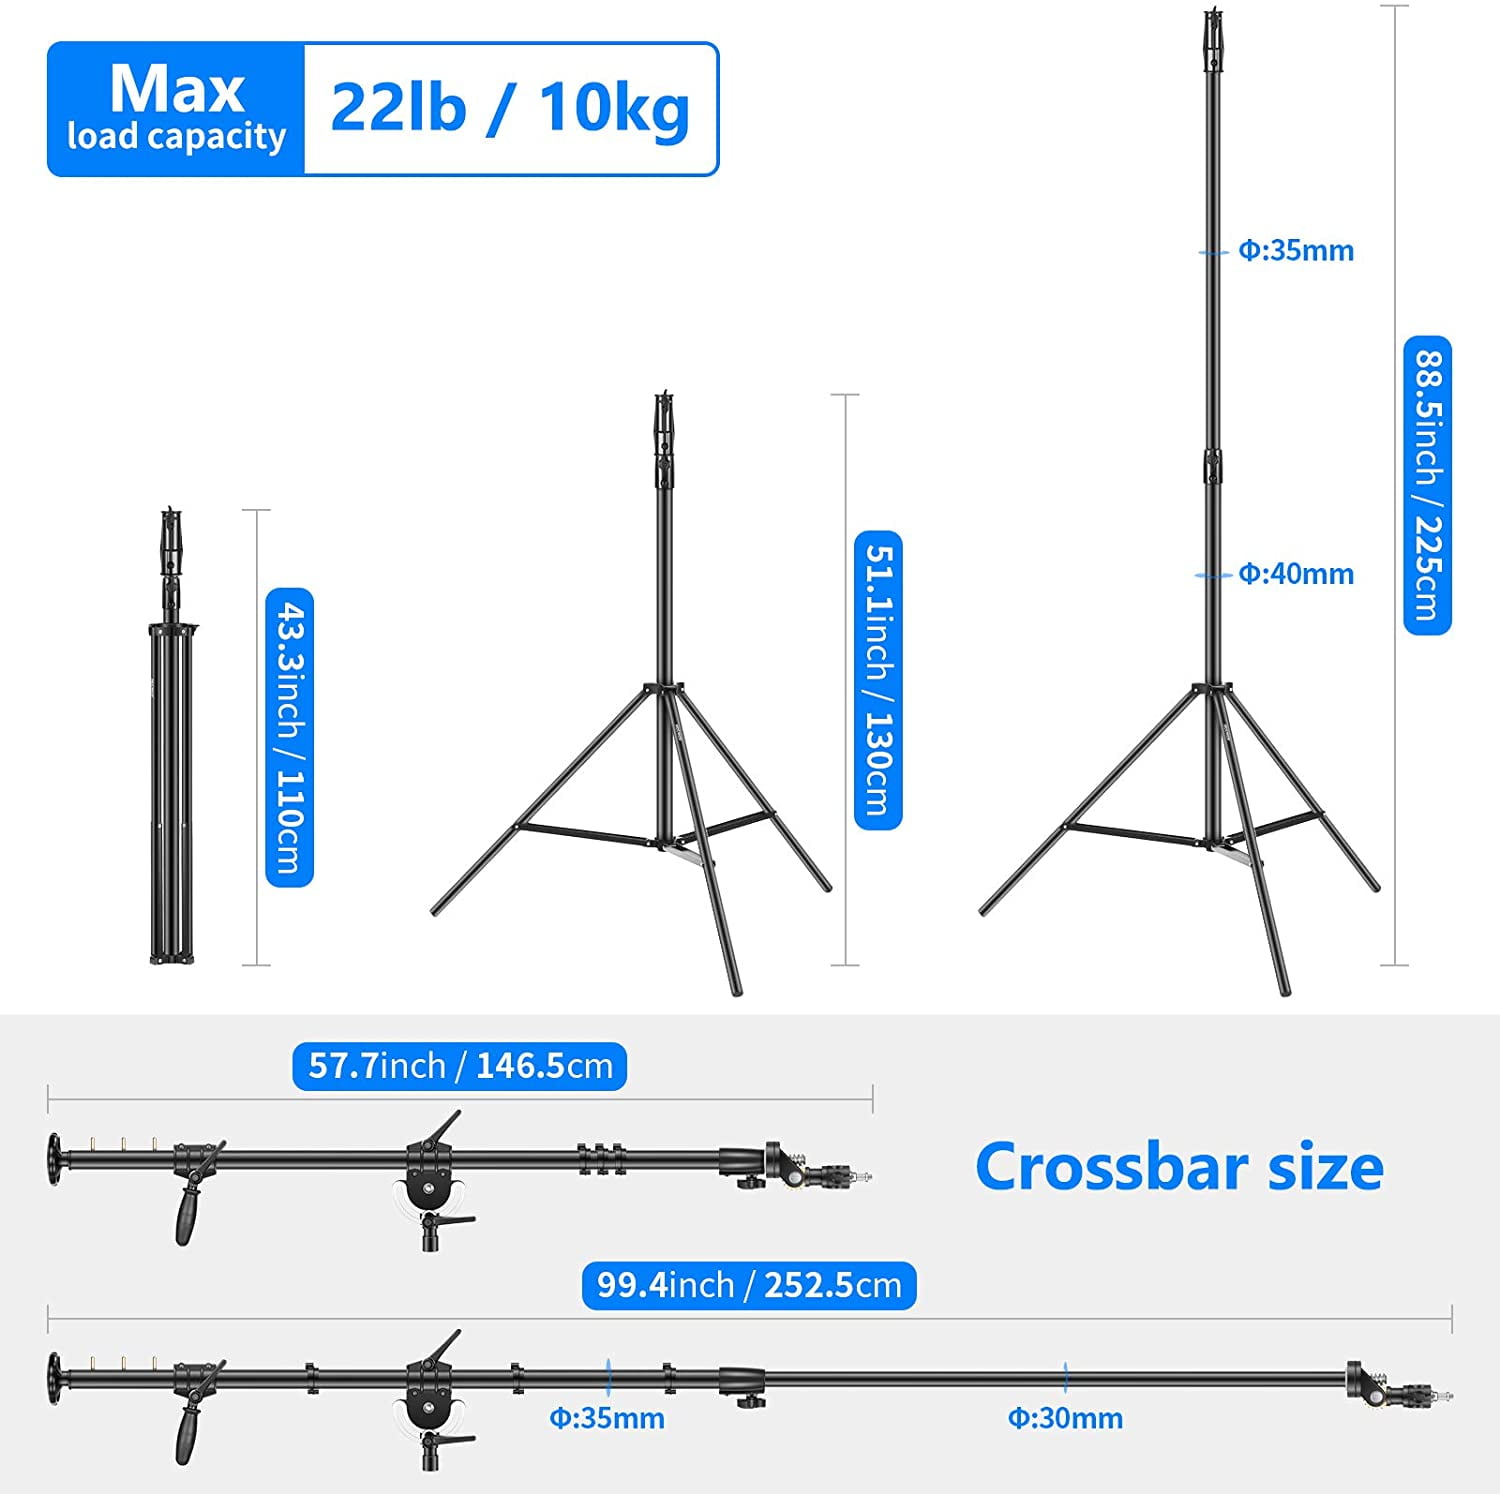 Neewer Photography Light Stand with Pro Boom Arm Load Up to 10KG 88.5/225CM Tripod Stand with 99.4/252.5CM Crossbar and Empty Sandbag for Monolight Strobe Softbox and Other Photography Equipment